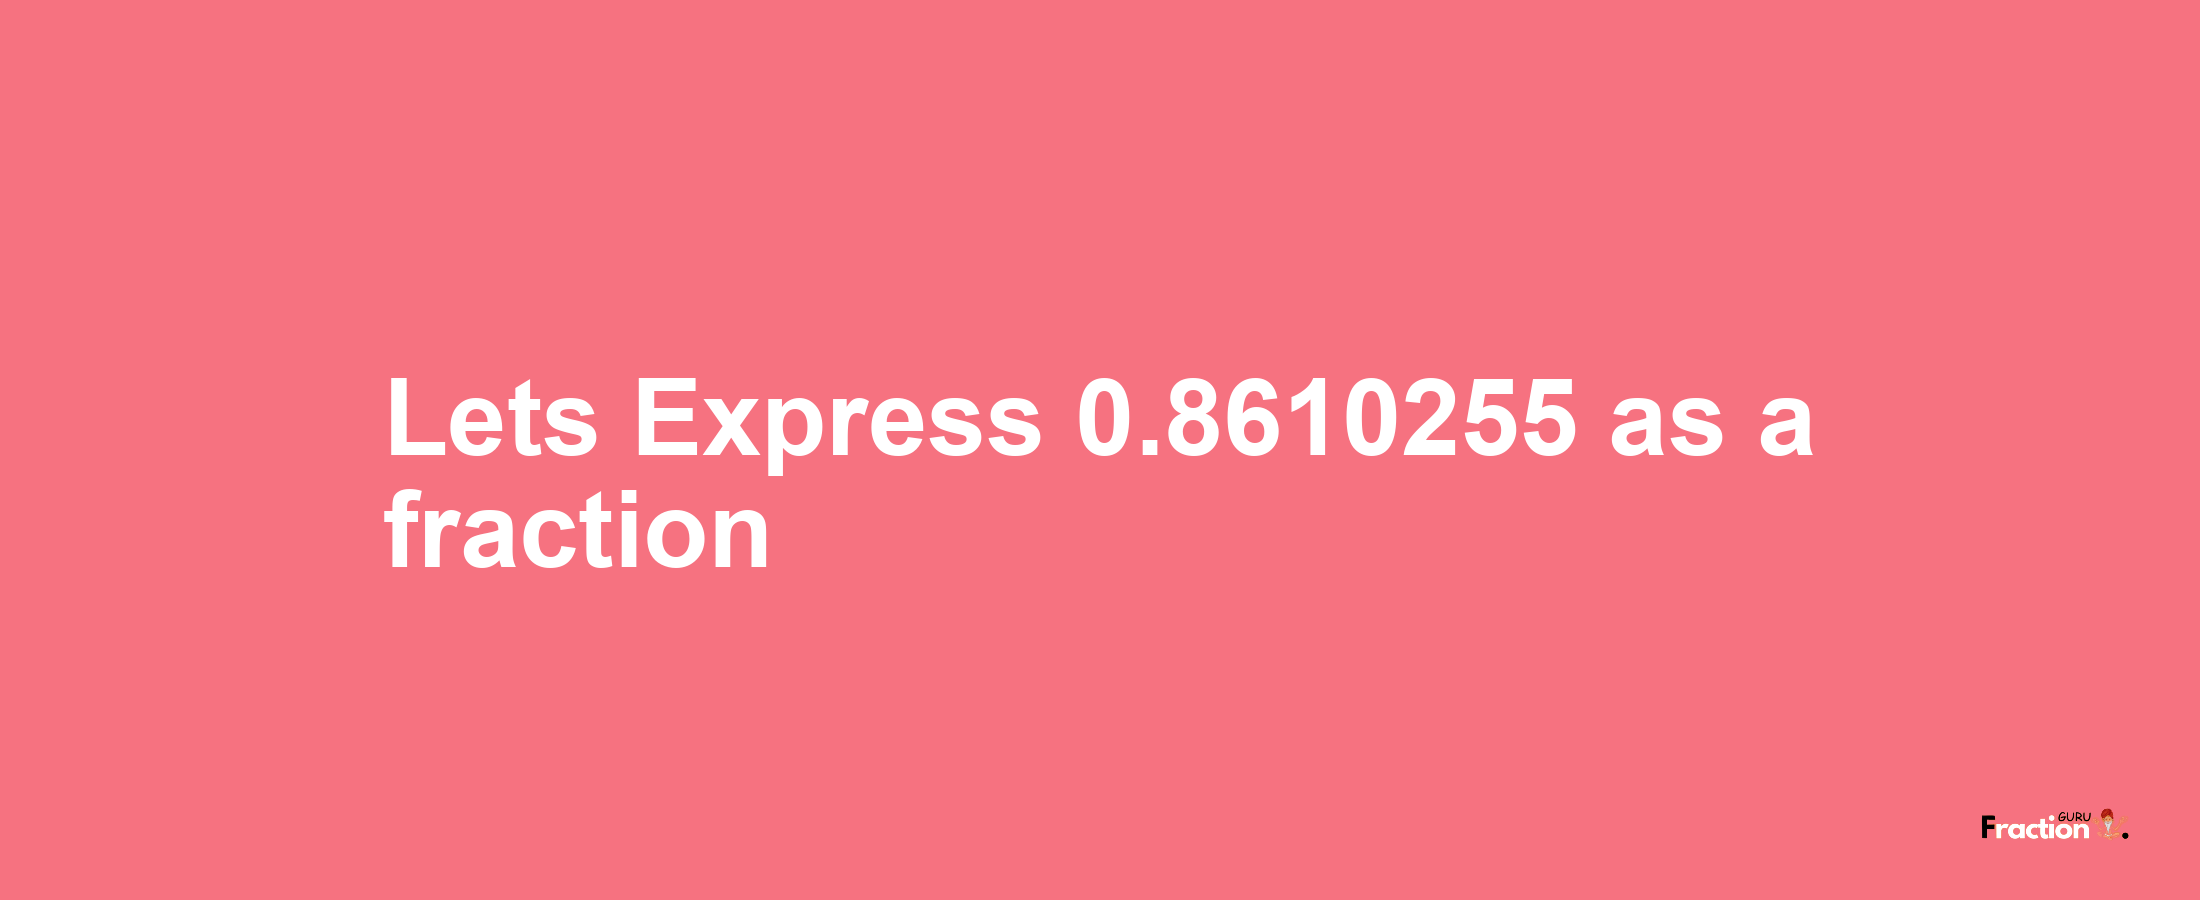 Lets Express 0.8610255 as afraction